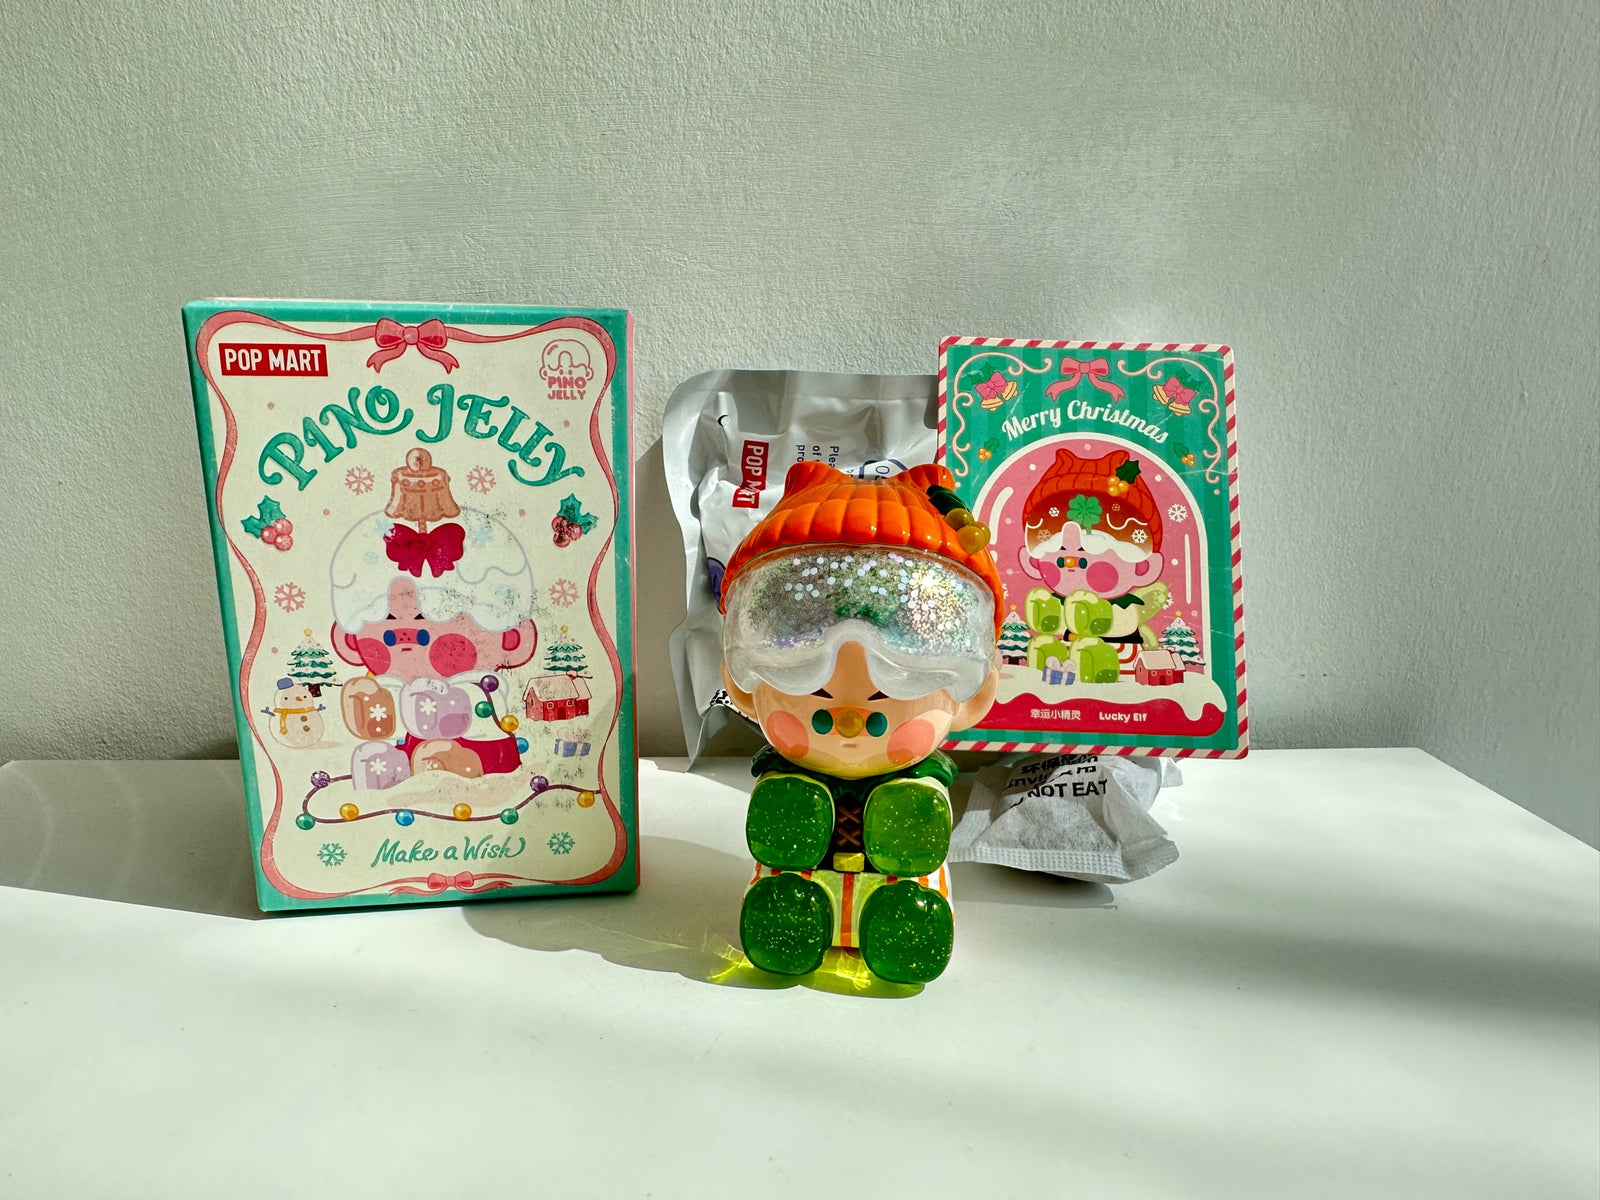 Lucky Elf - Pino Jelly Make a Wish Series by POP MART - 1